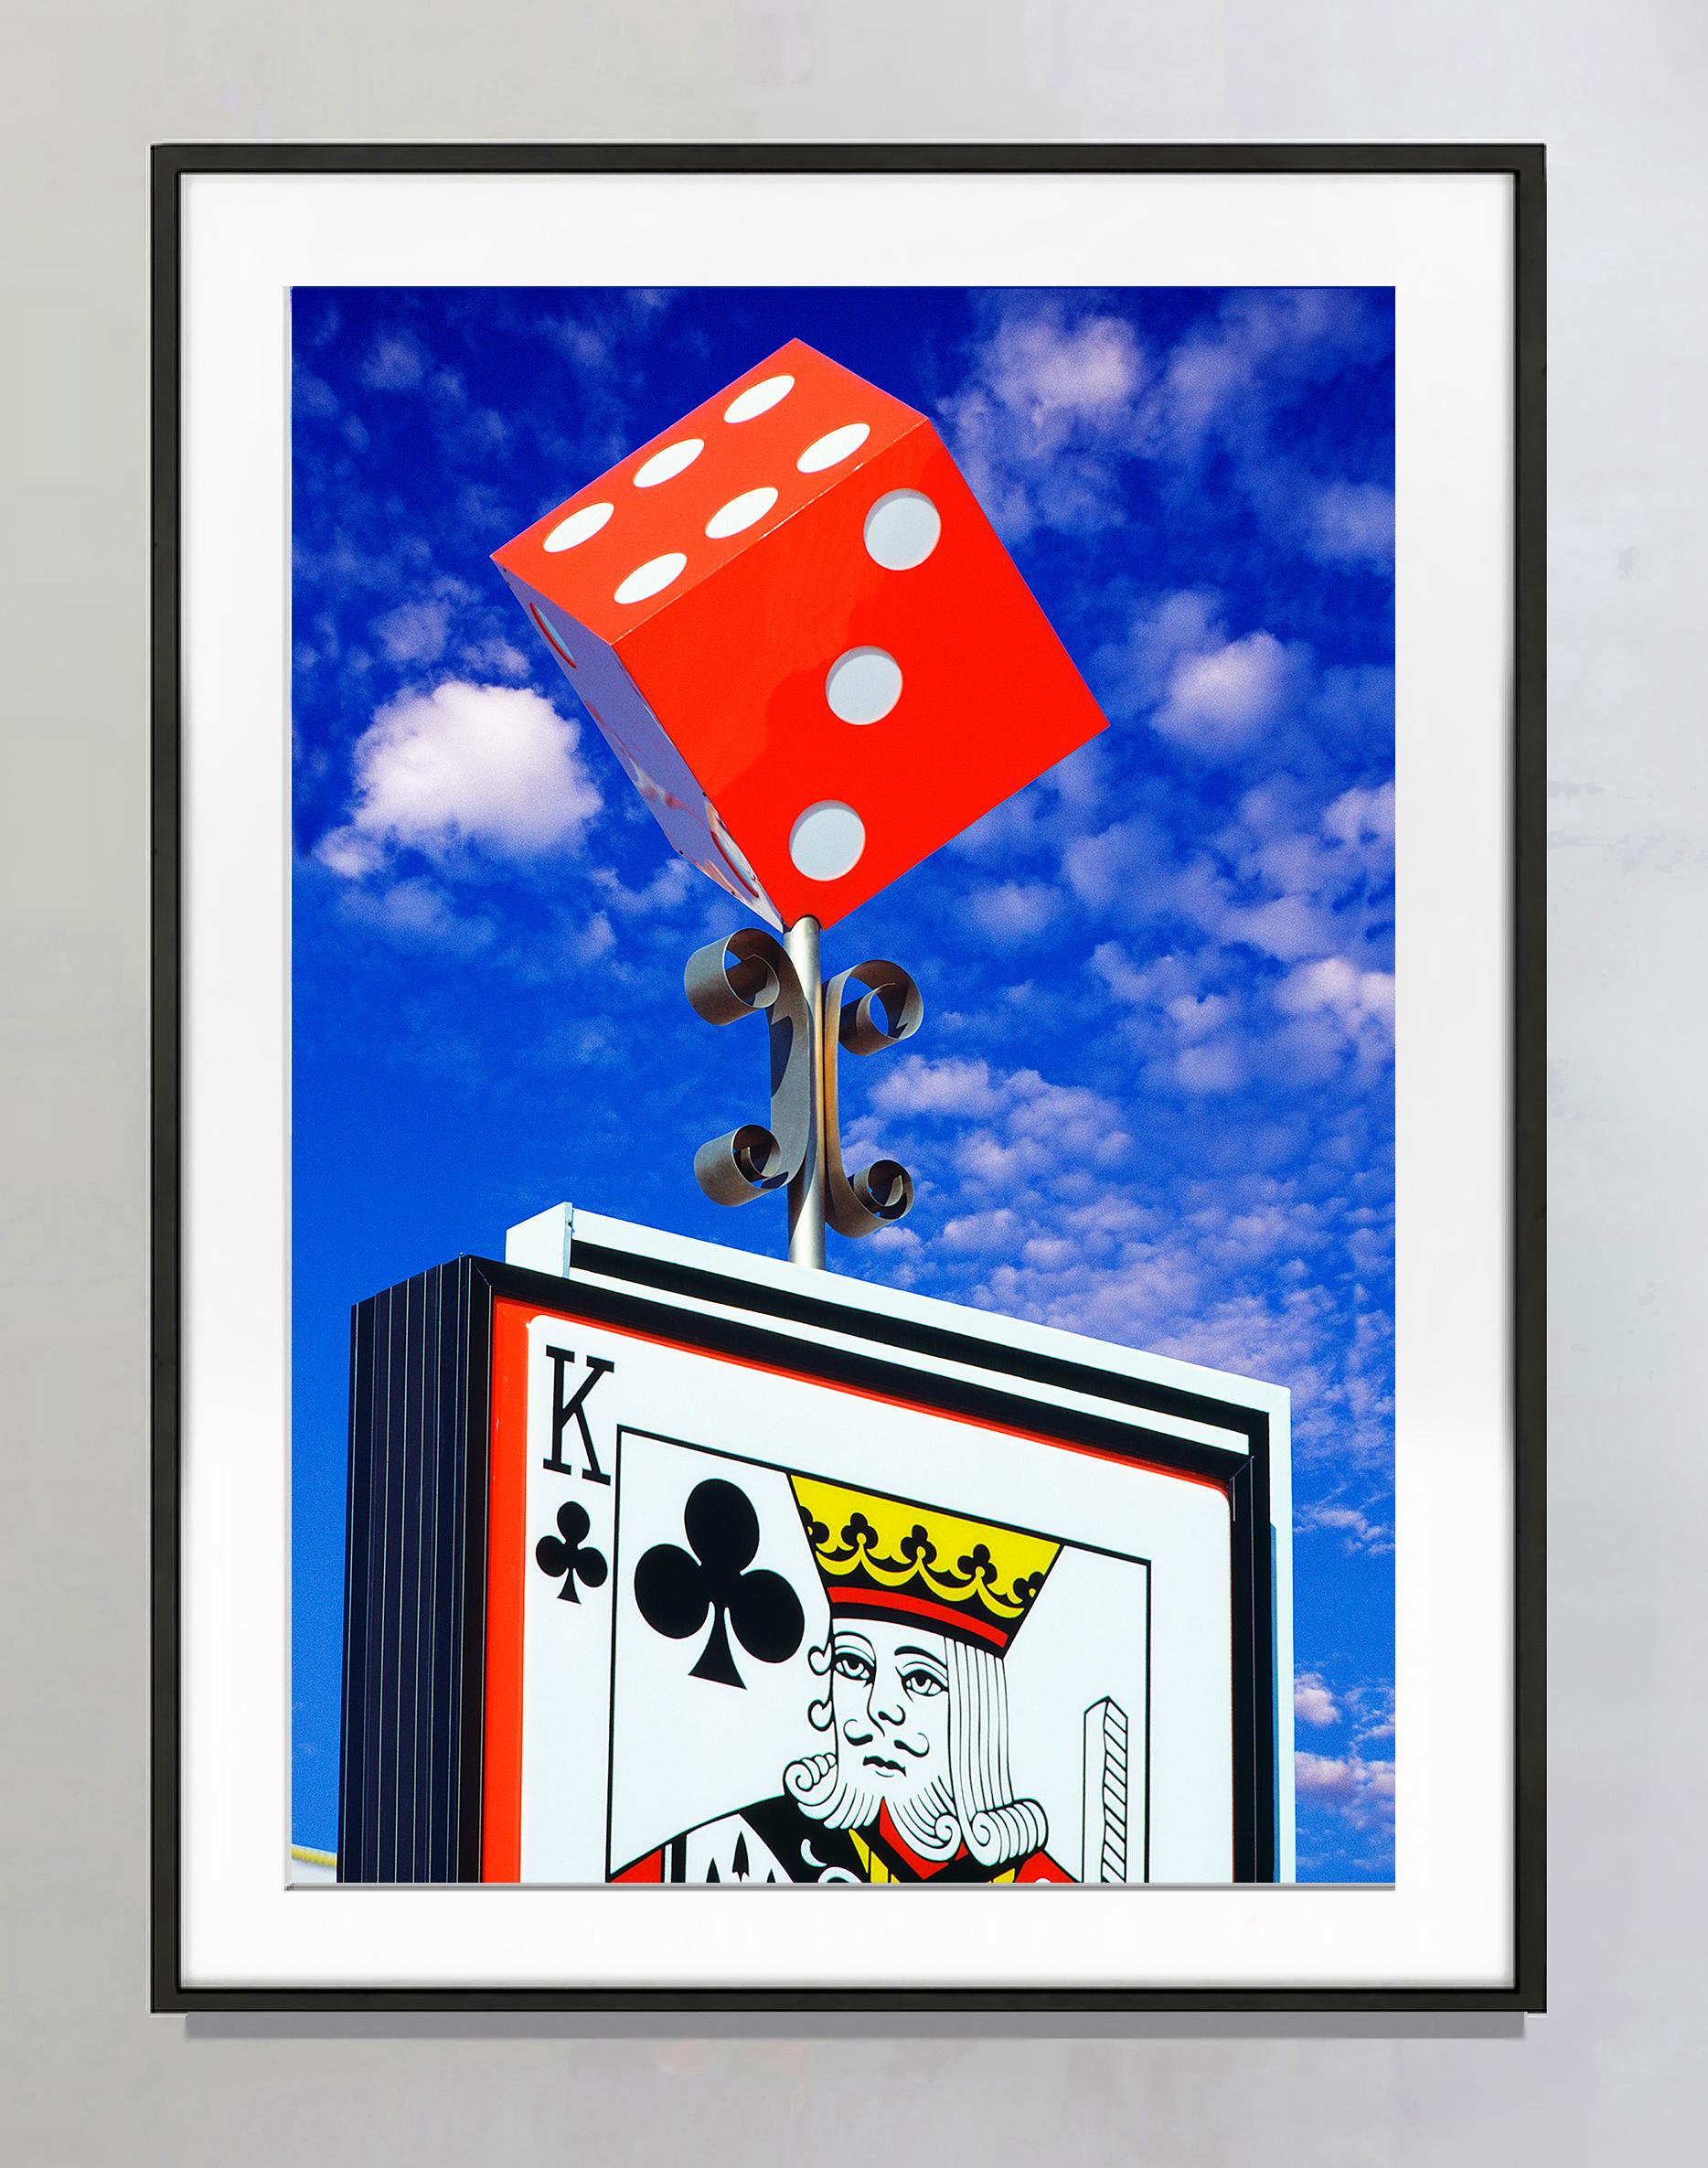 Las Vegas Gambling Dice  - Primary Colors  - Photograph by Mitchell Funk